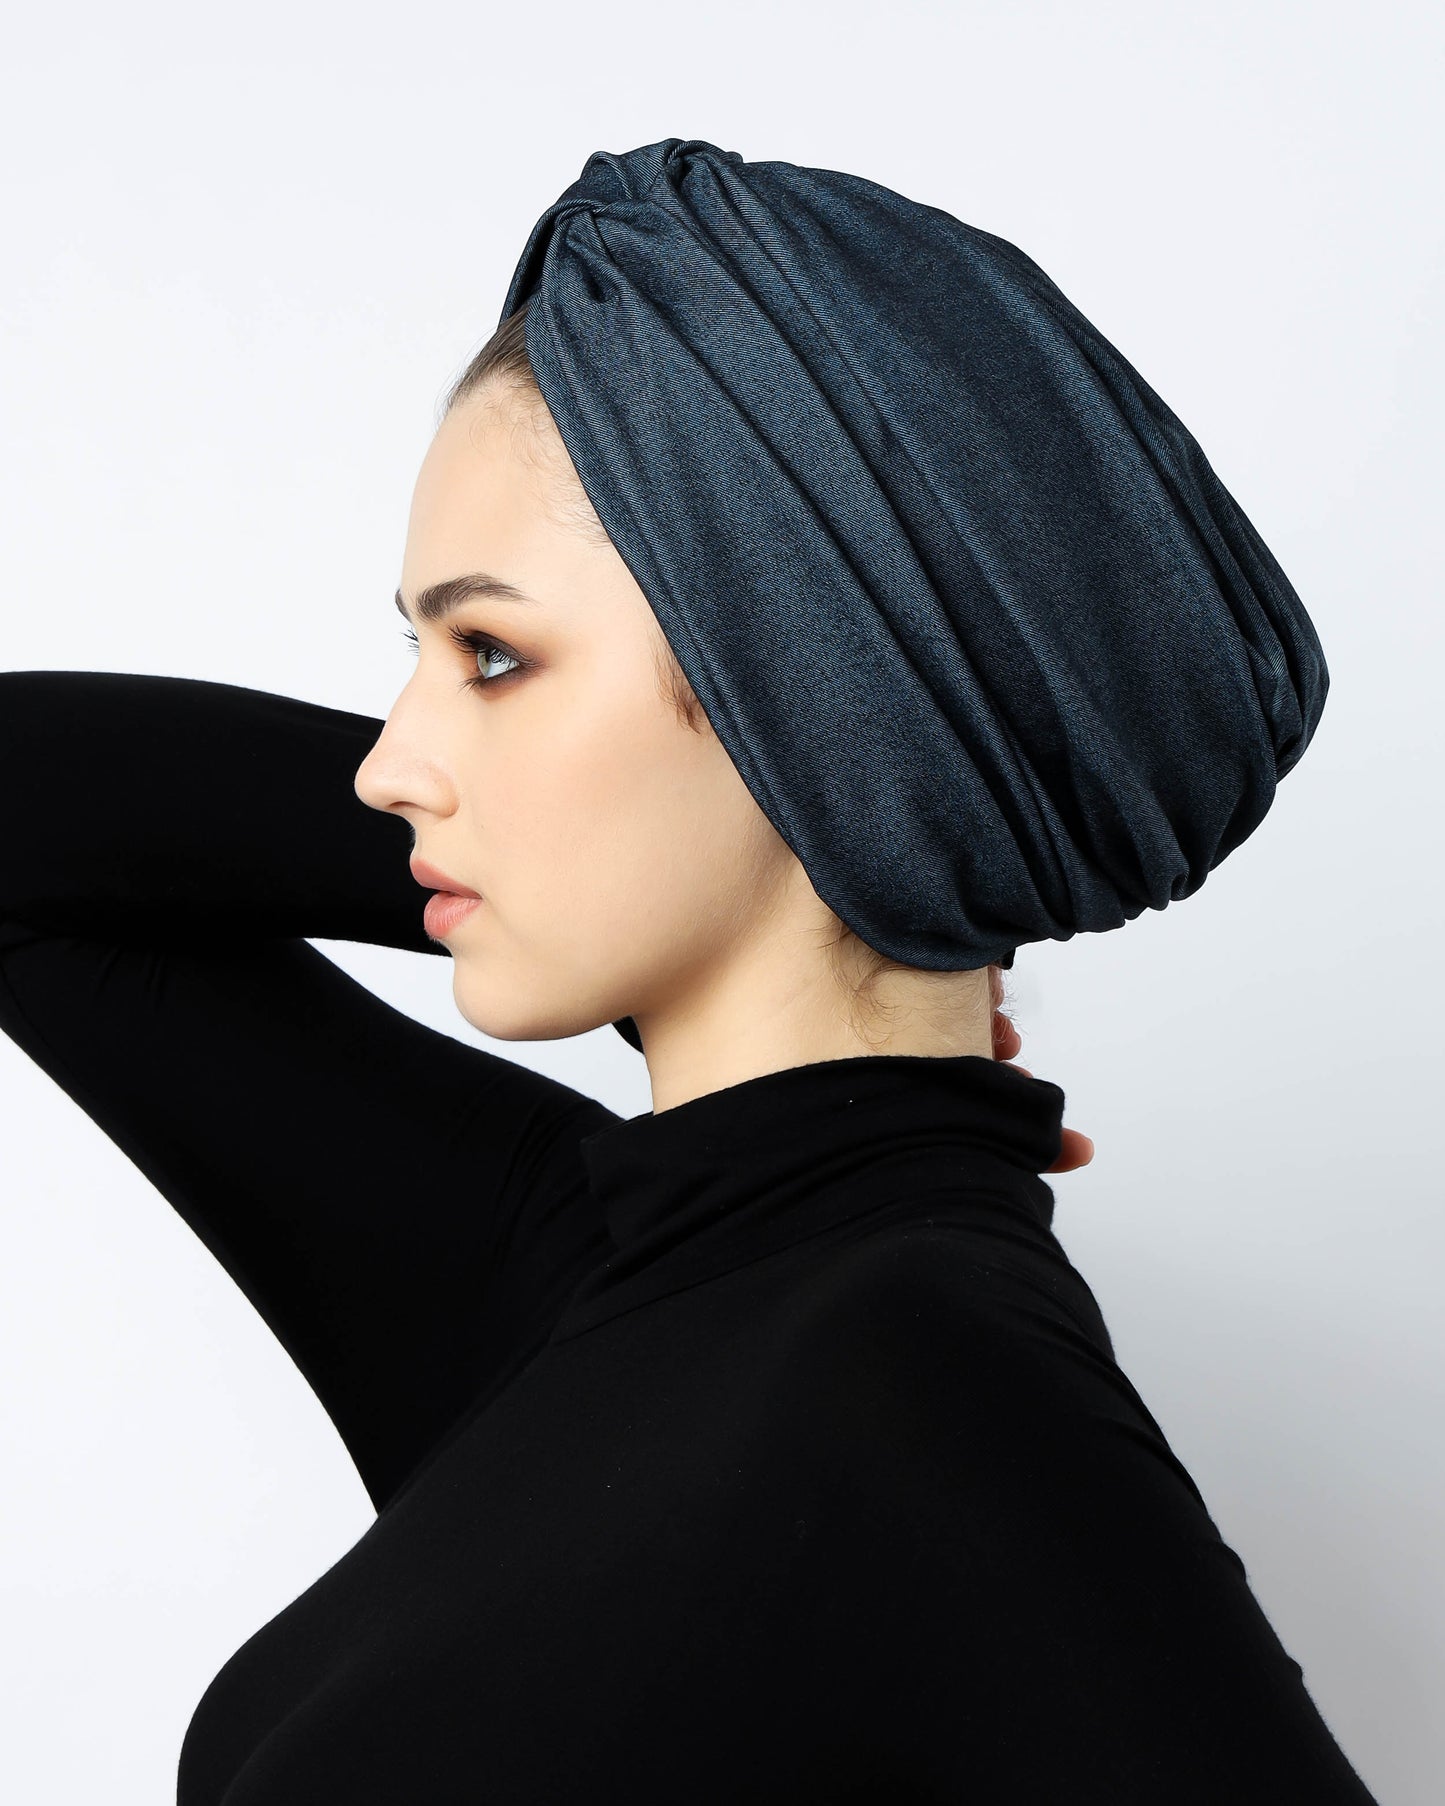 Jeans Twisted turban